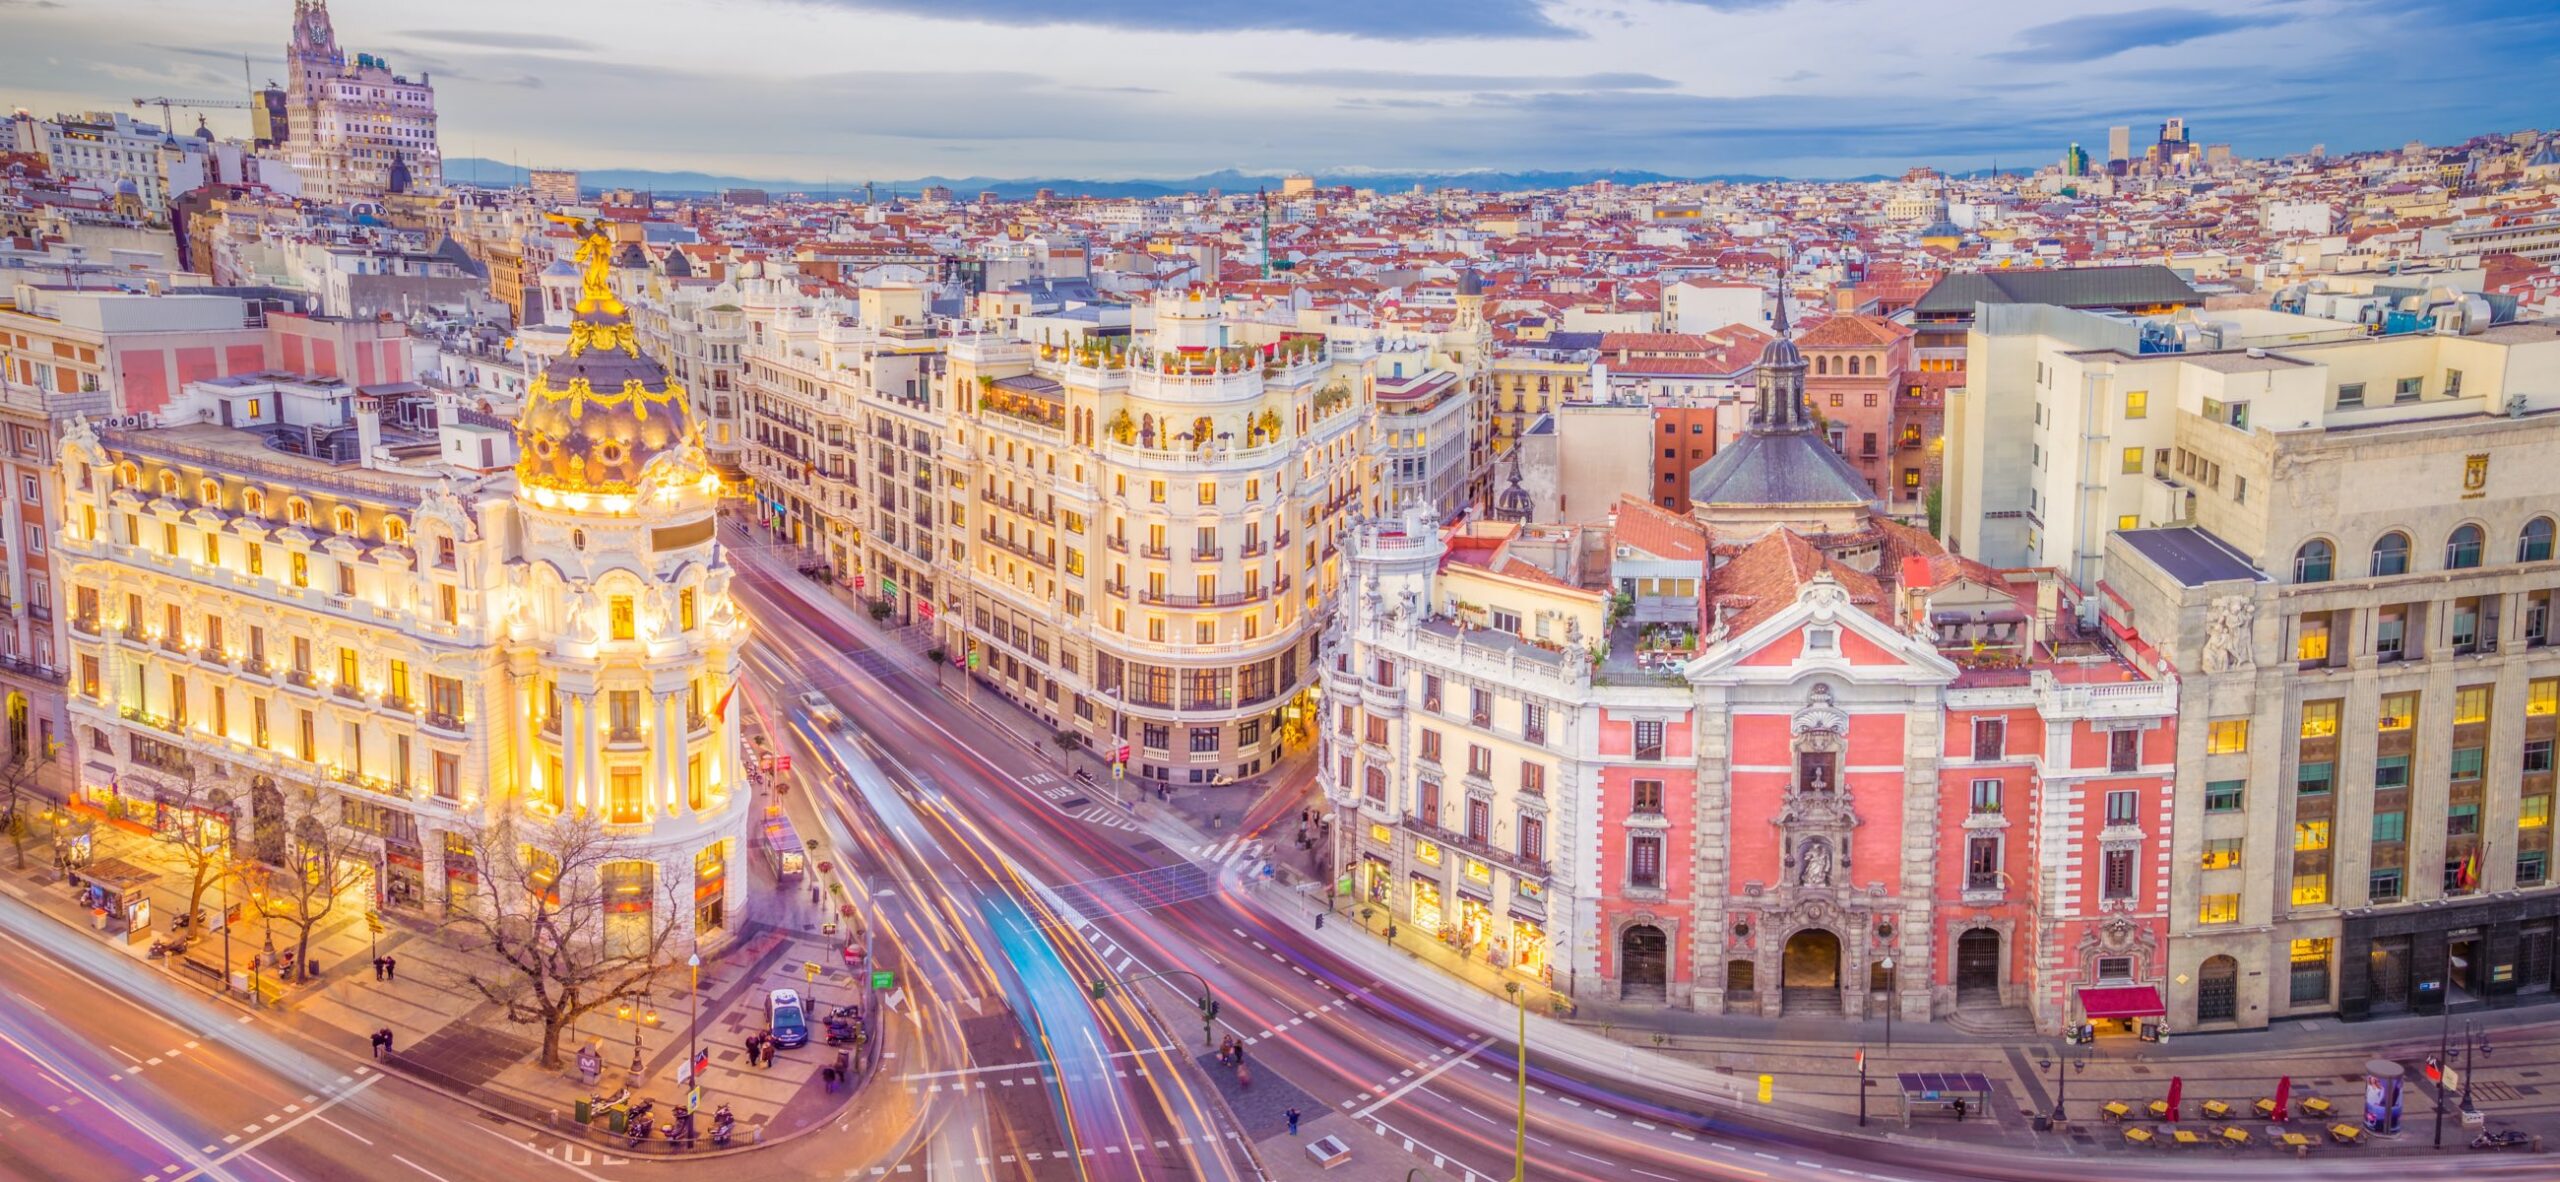 Inside the Spanish Capital: 10 Fun Facts About Madrid